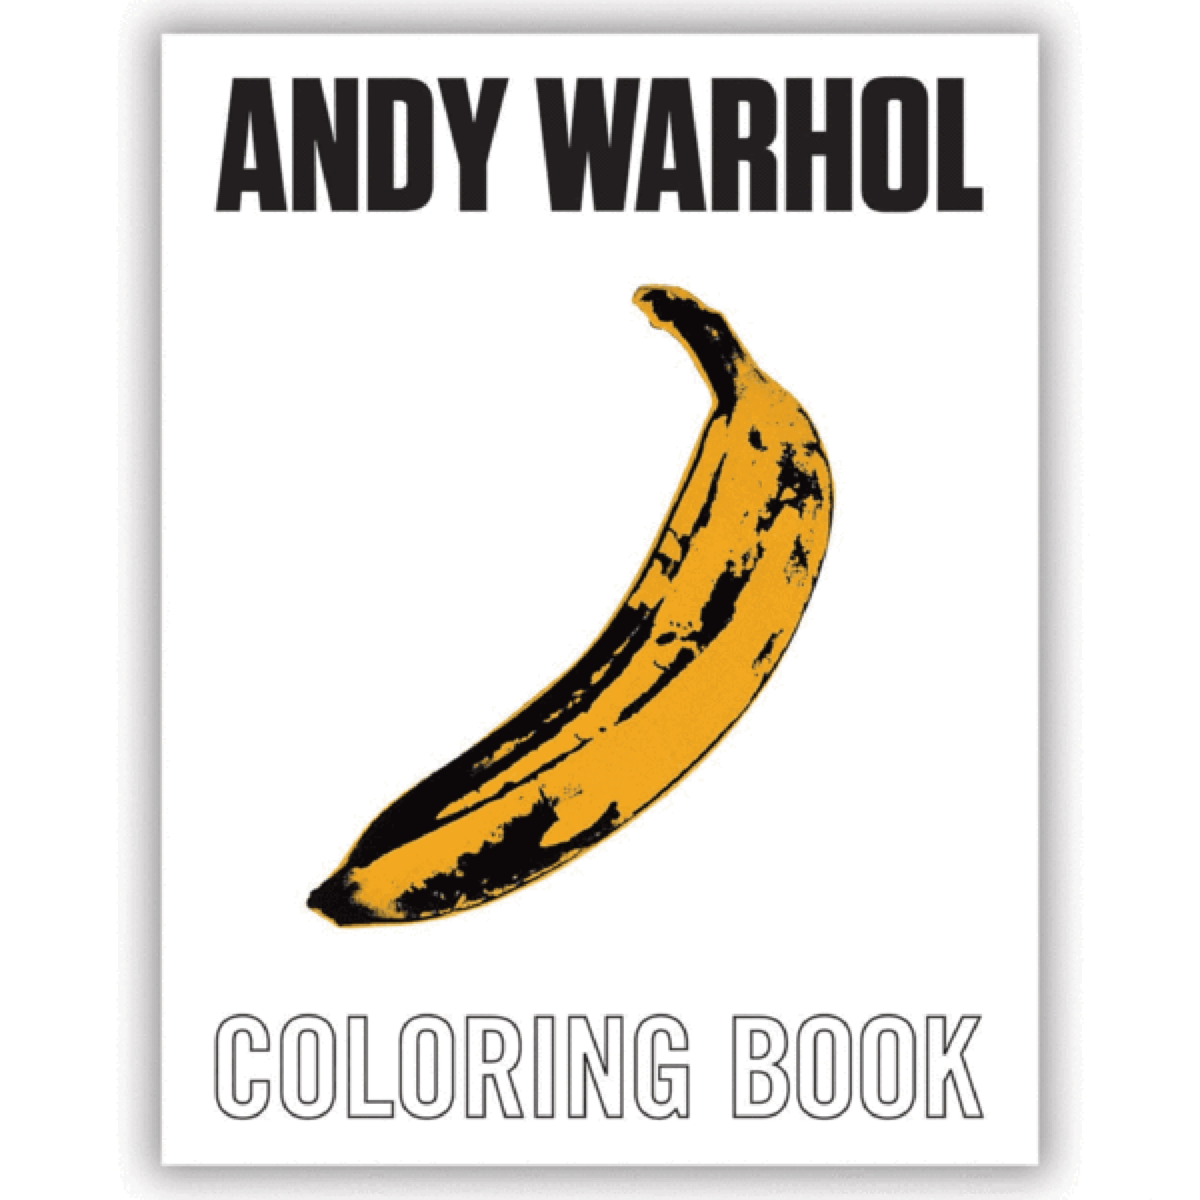 “The Andy Warhol Coloring Book,” $9.99